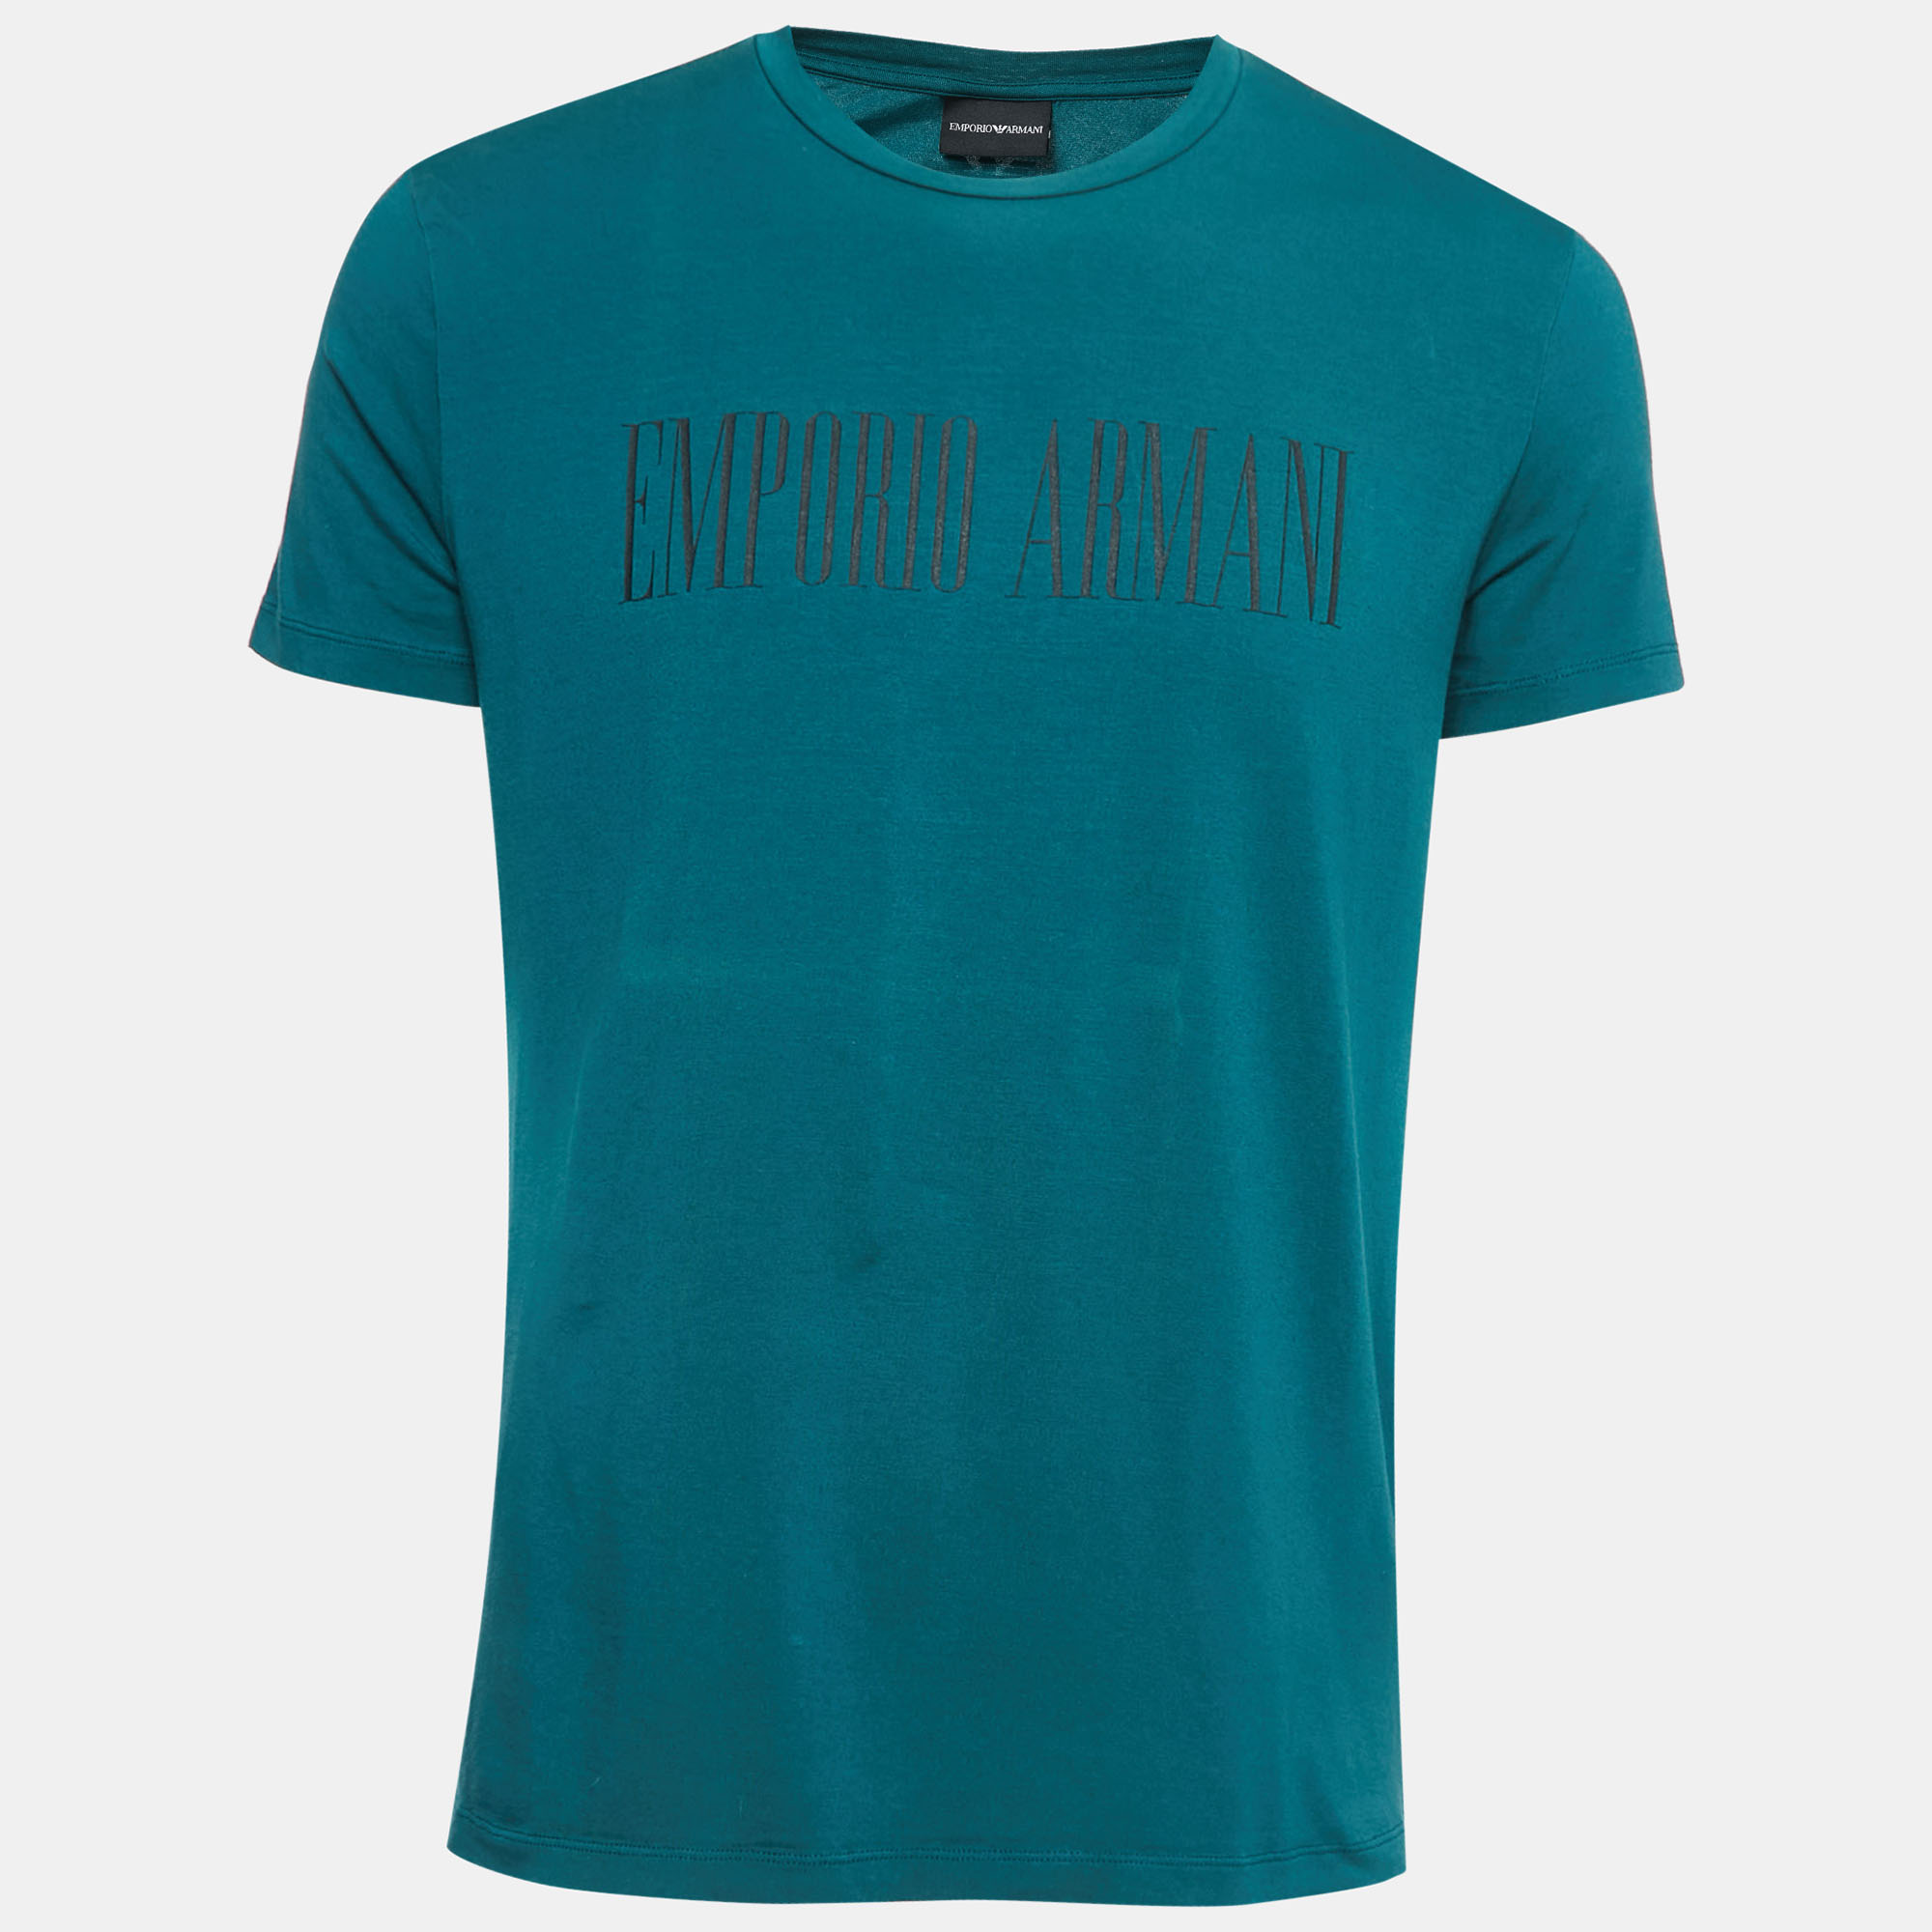 Choose all day comfort with this Emporio Armani T shirt. Beautifully sewn the T shirt featuring a round neckline and short sleeves guarantees quality and simple style.